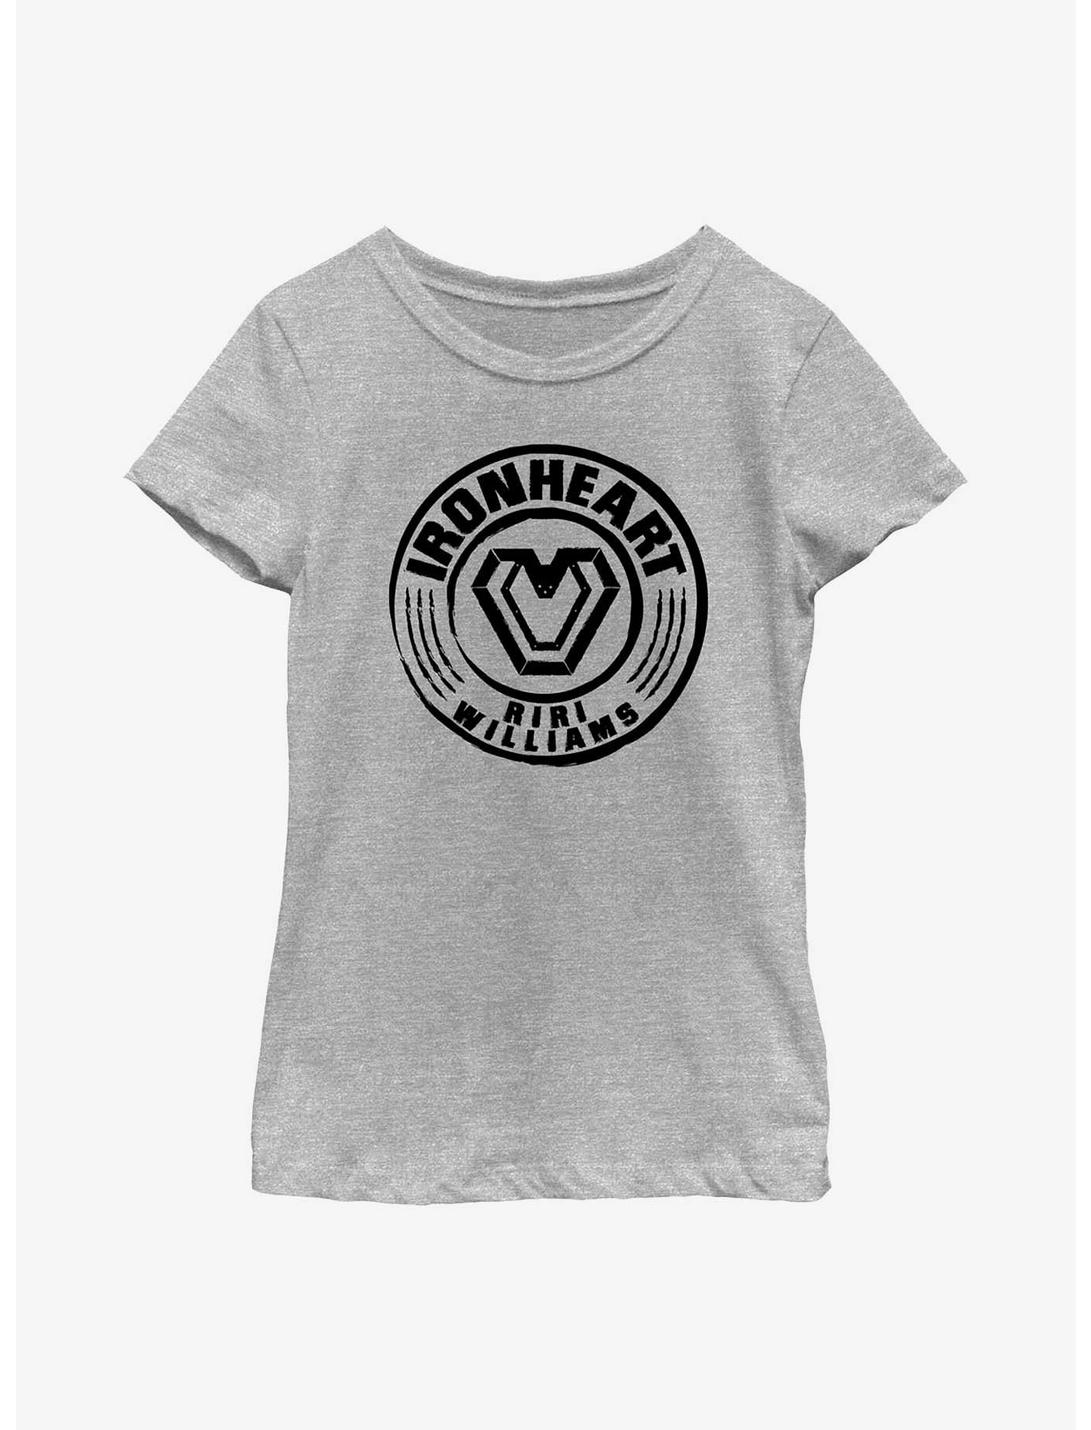 Marvel Black Panther: Wakanda Forever Ironheart Stamp Youth Girls T-Shirt, ATH HTR, hi-res